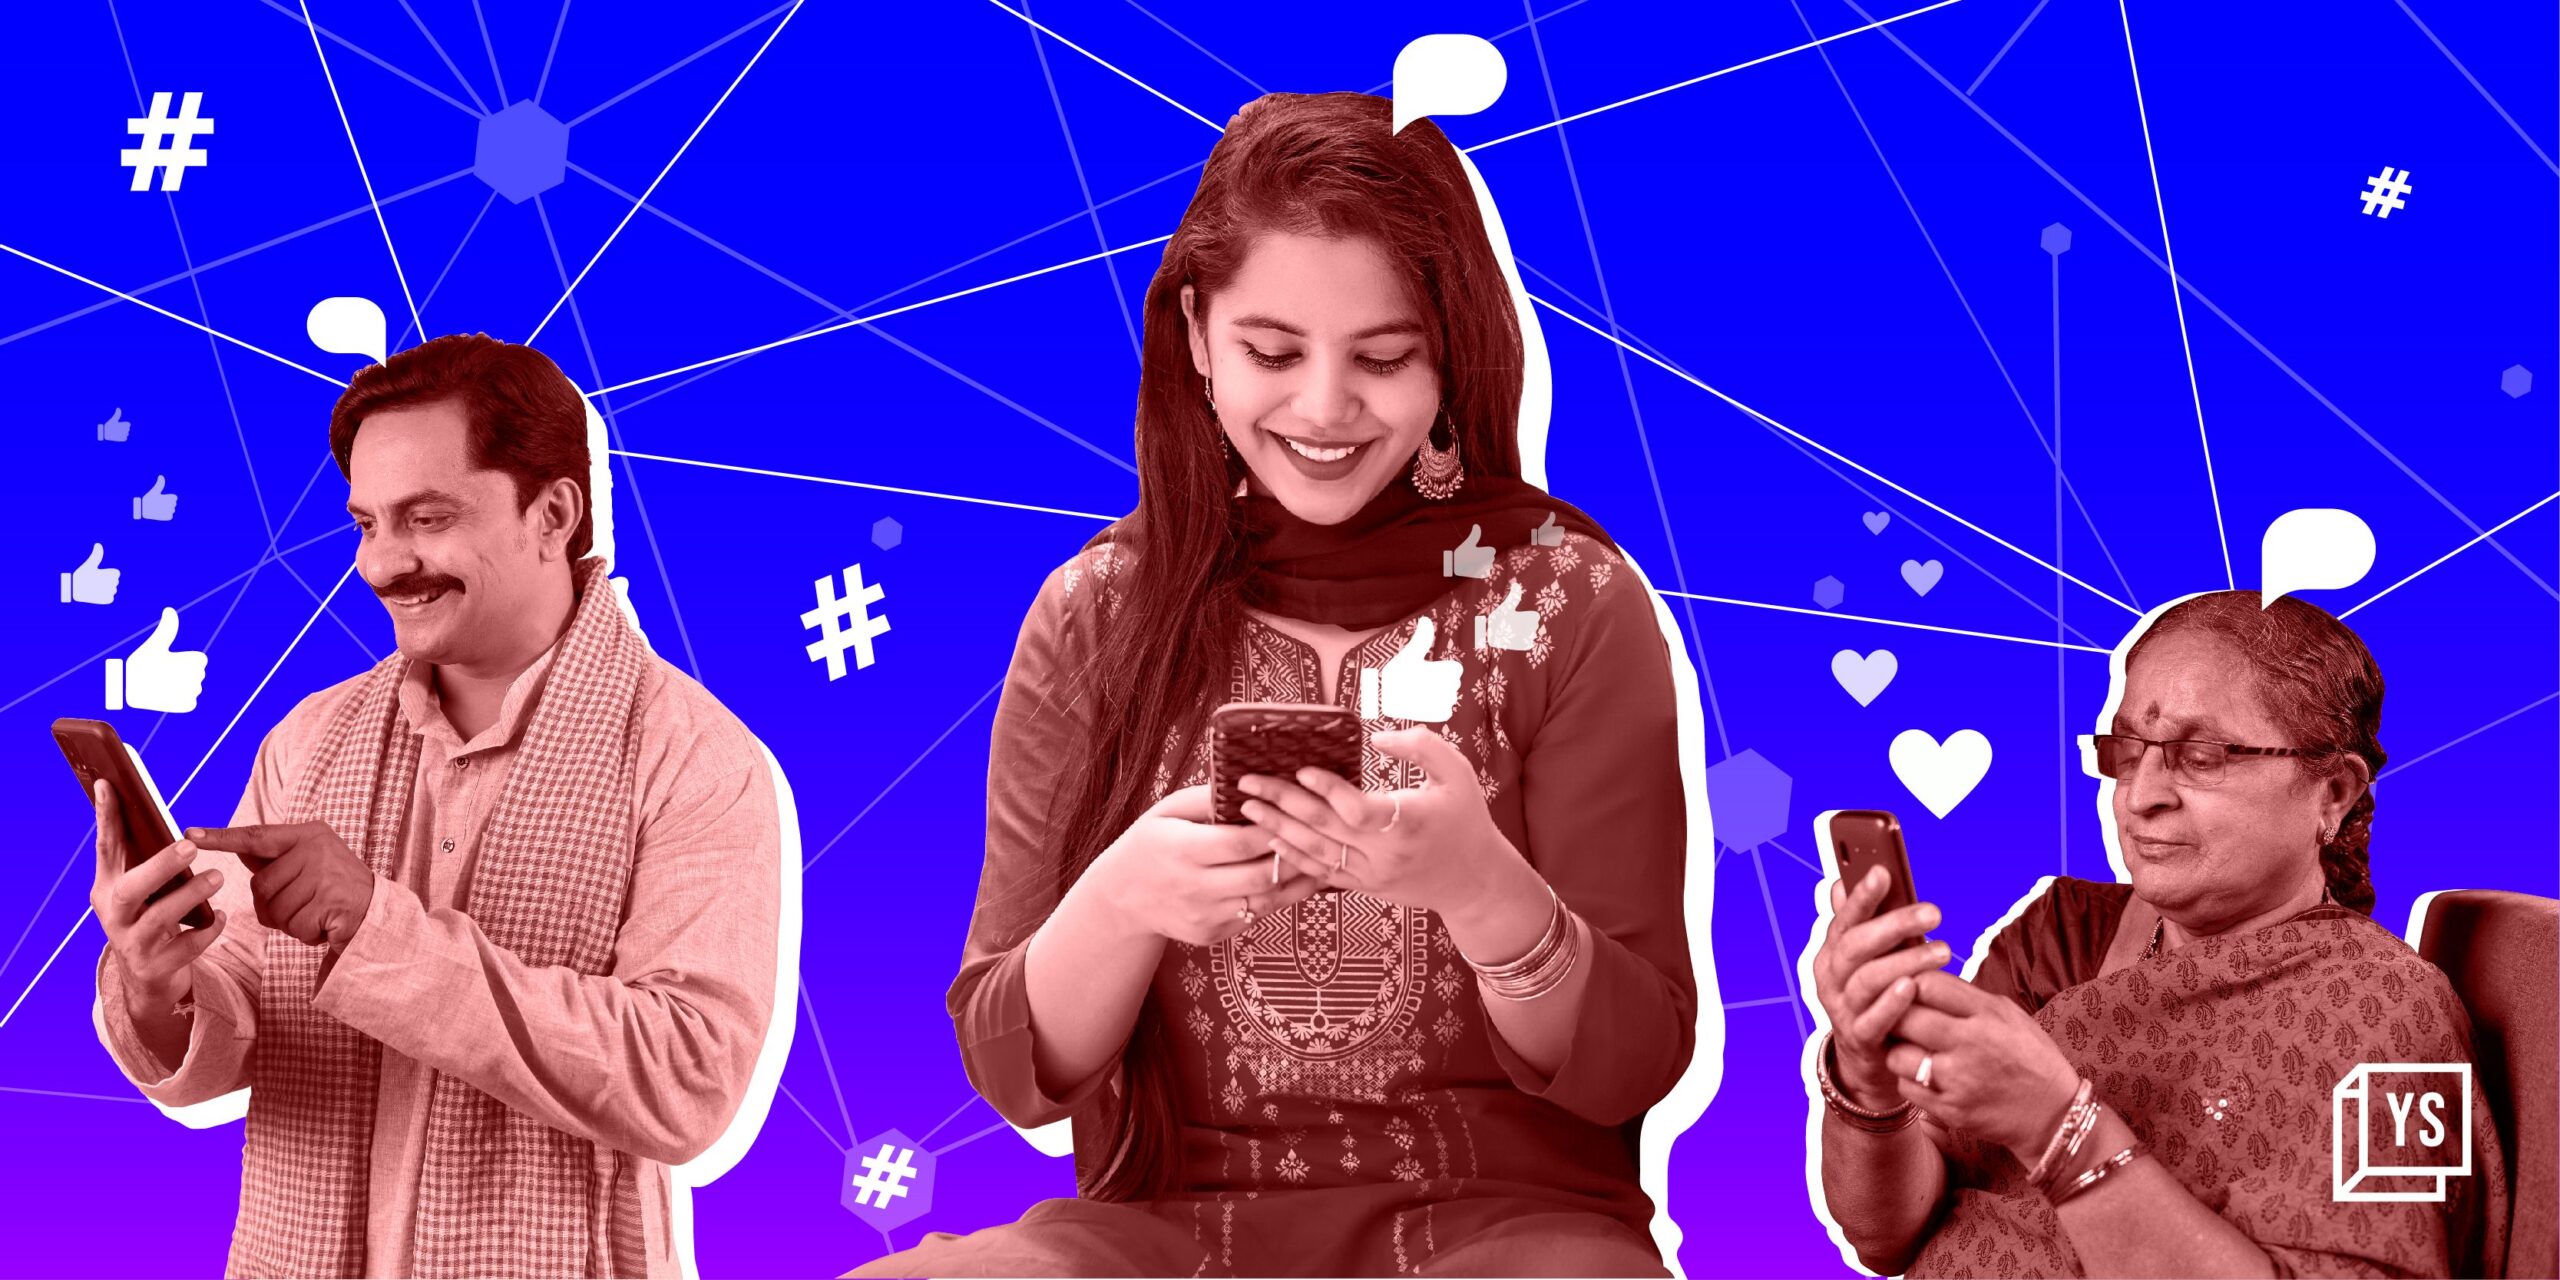 You are currently viewing Two-thirds of consumers in India find user-generated content to be as entertaining as traditional media: Accenture report